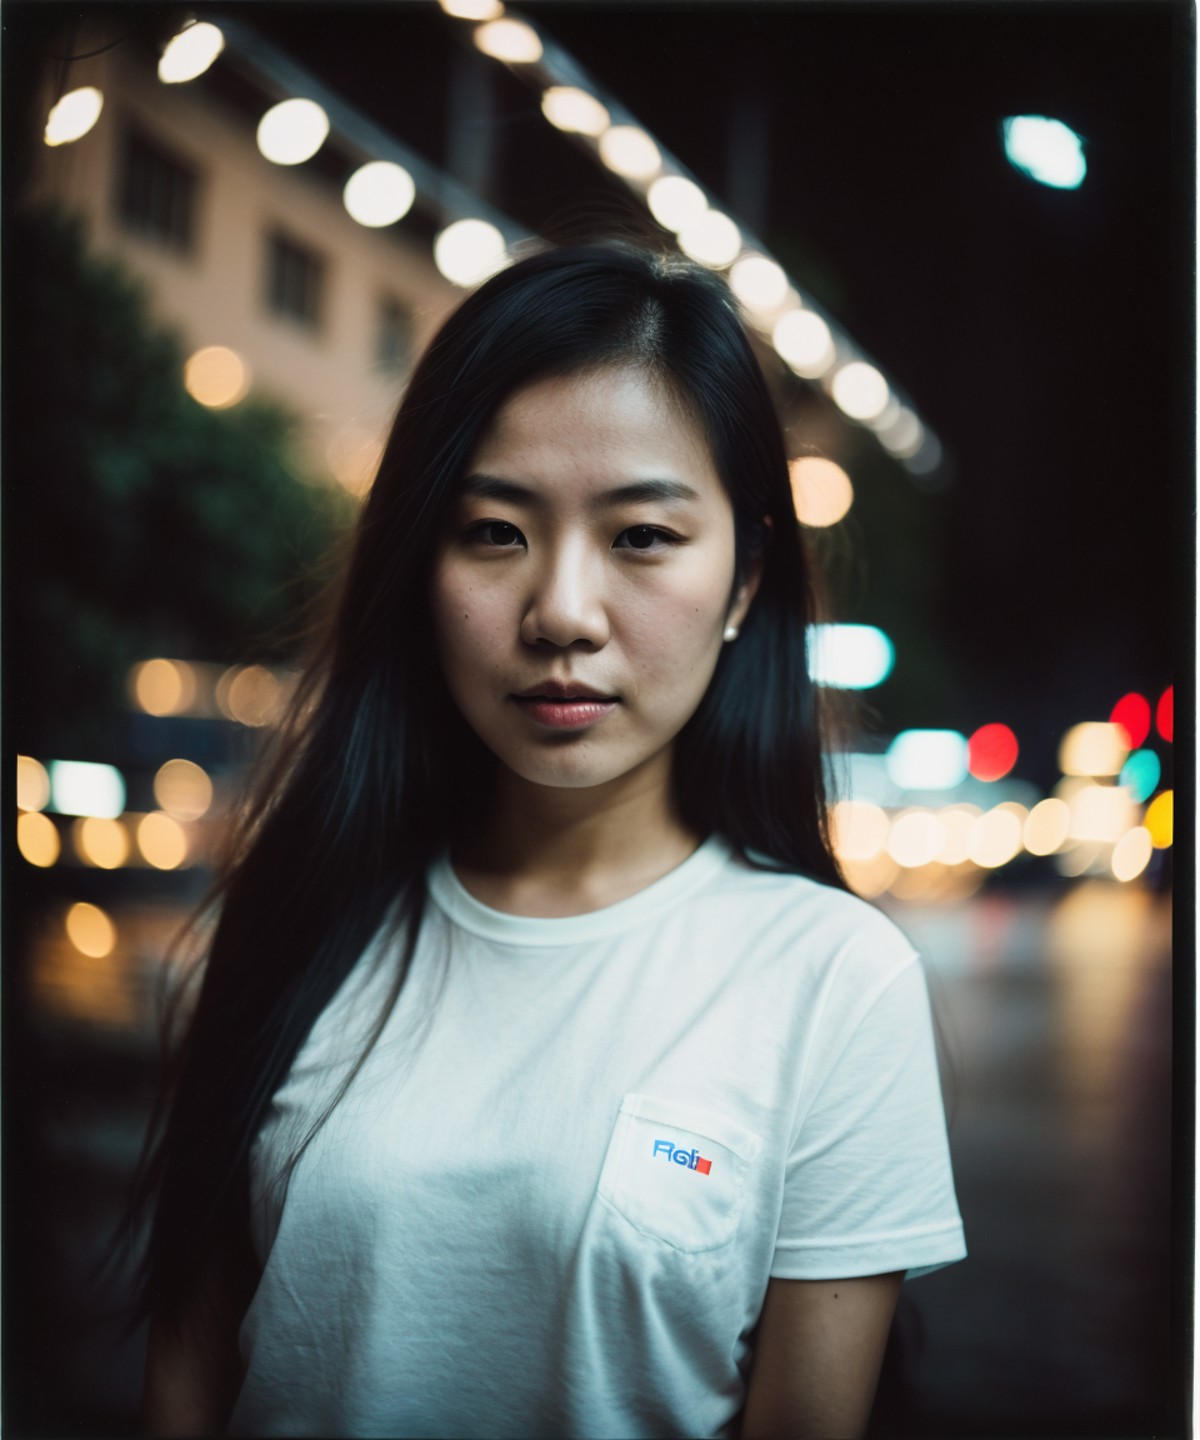 polaroid photo, high quality, night photo, portrait photo of 26 y.o asian woman, wearing casual clothes, bokeh, motion blur